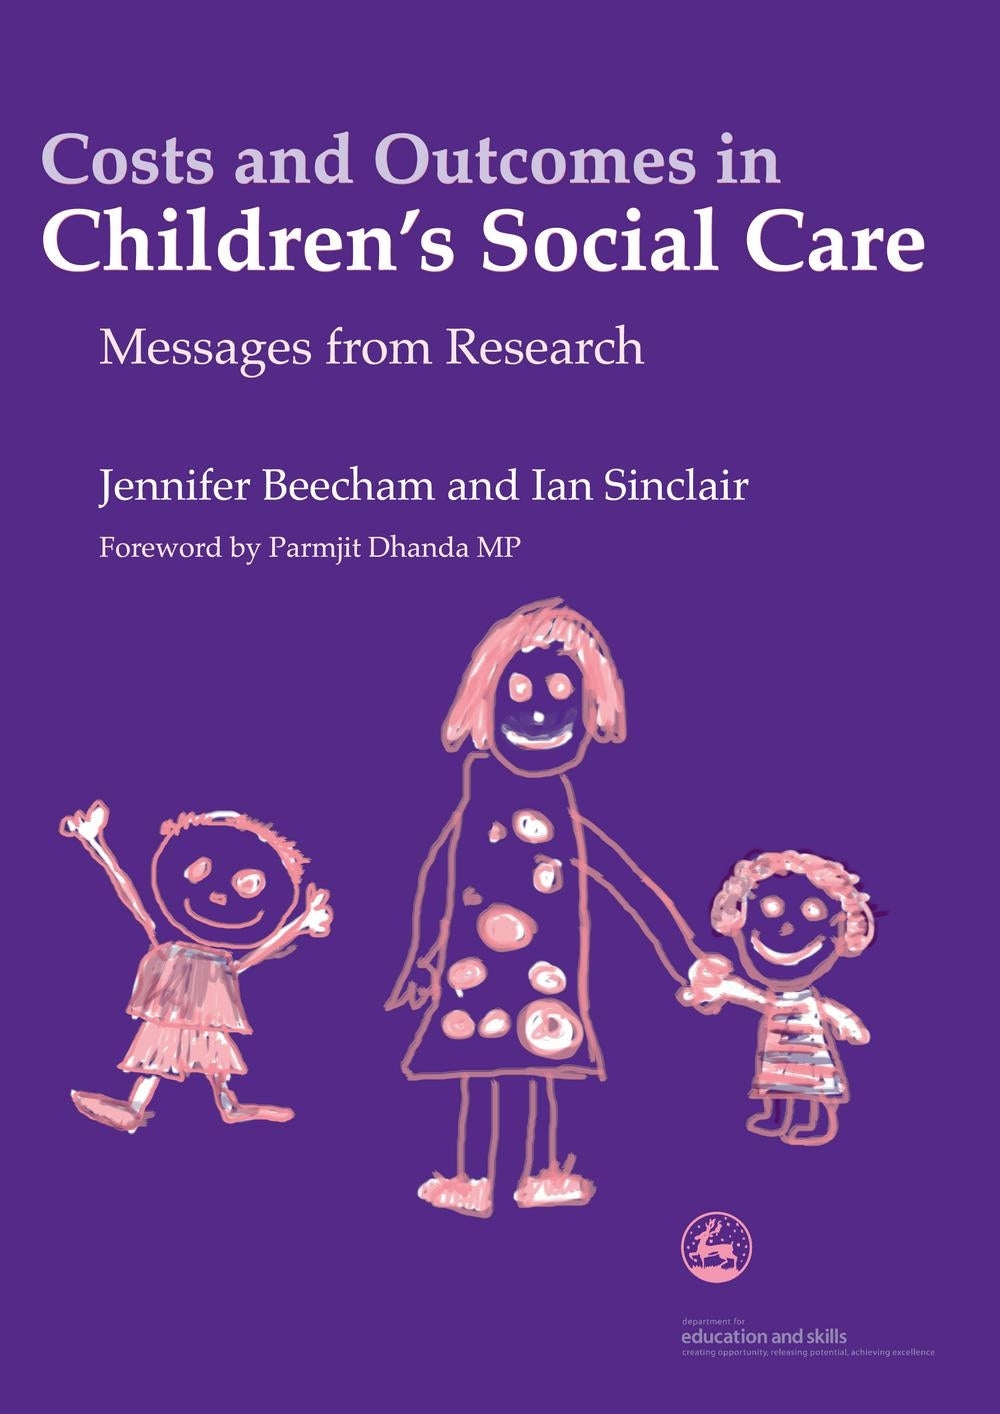 Costs and Outcomes in Children's Social Care by Jennifer K Beecham, Ian Sinclair